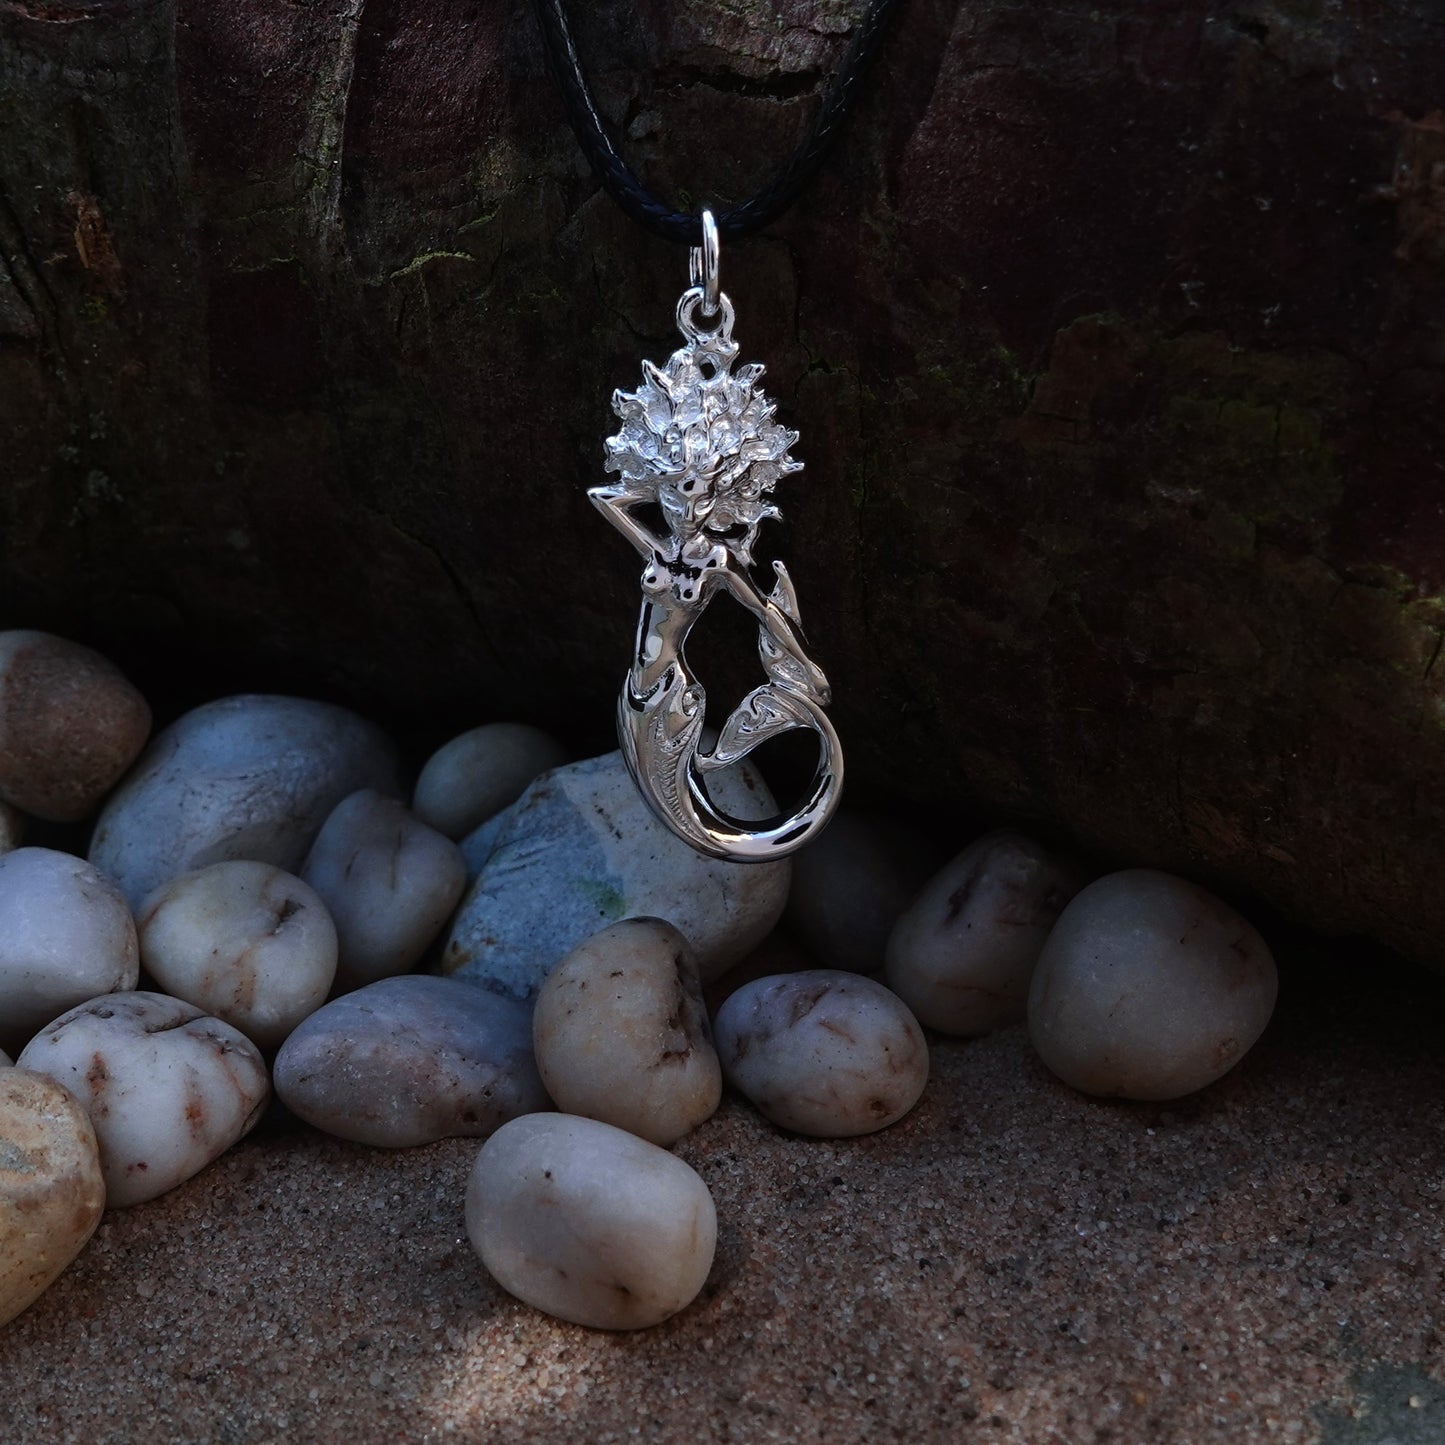 Mermaid necklace. Made from highly polished, tarnish resistant silver, strung on a strong cord. © Adrian Ashley